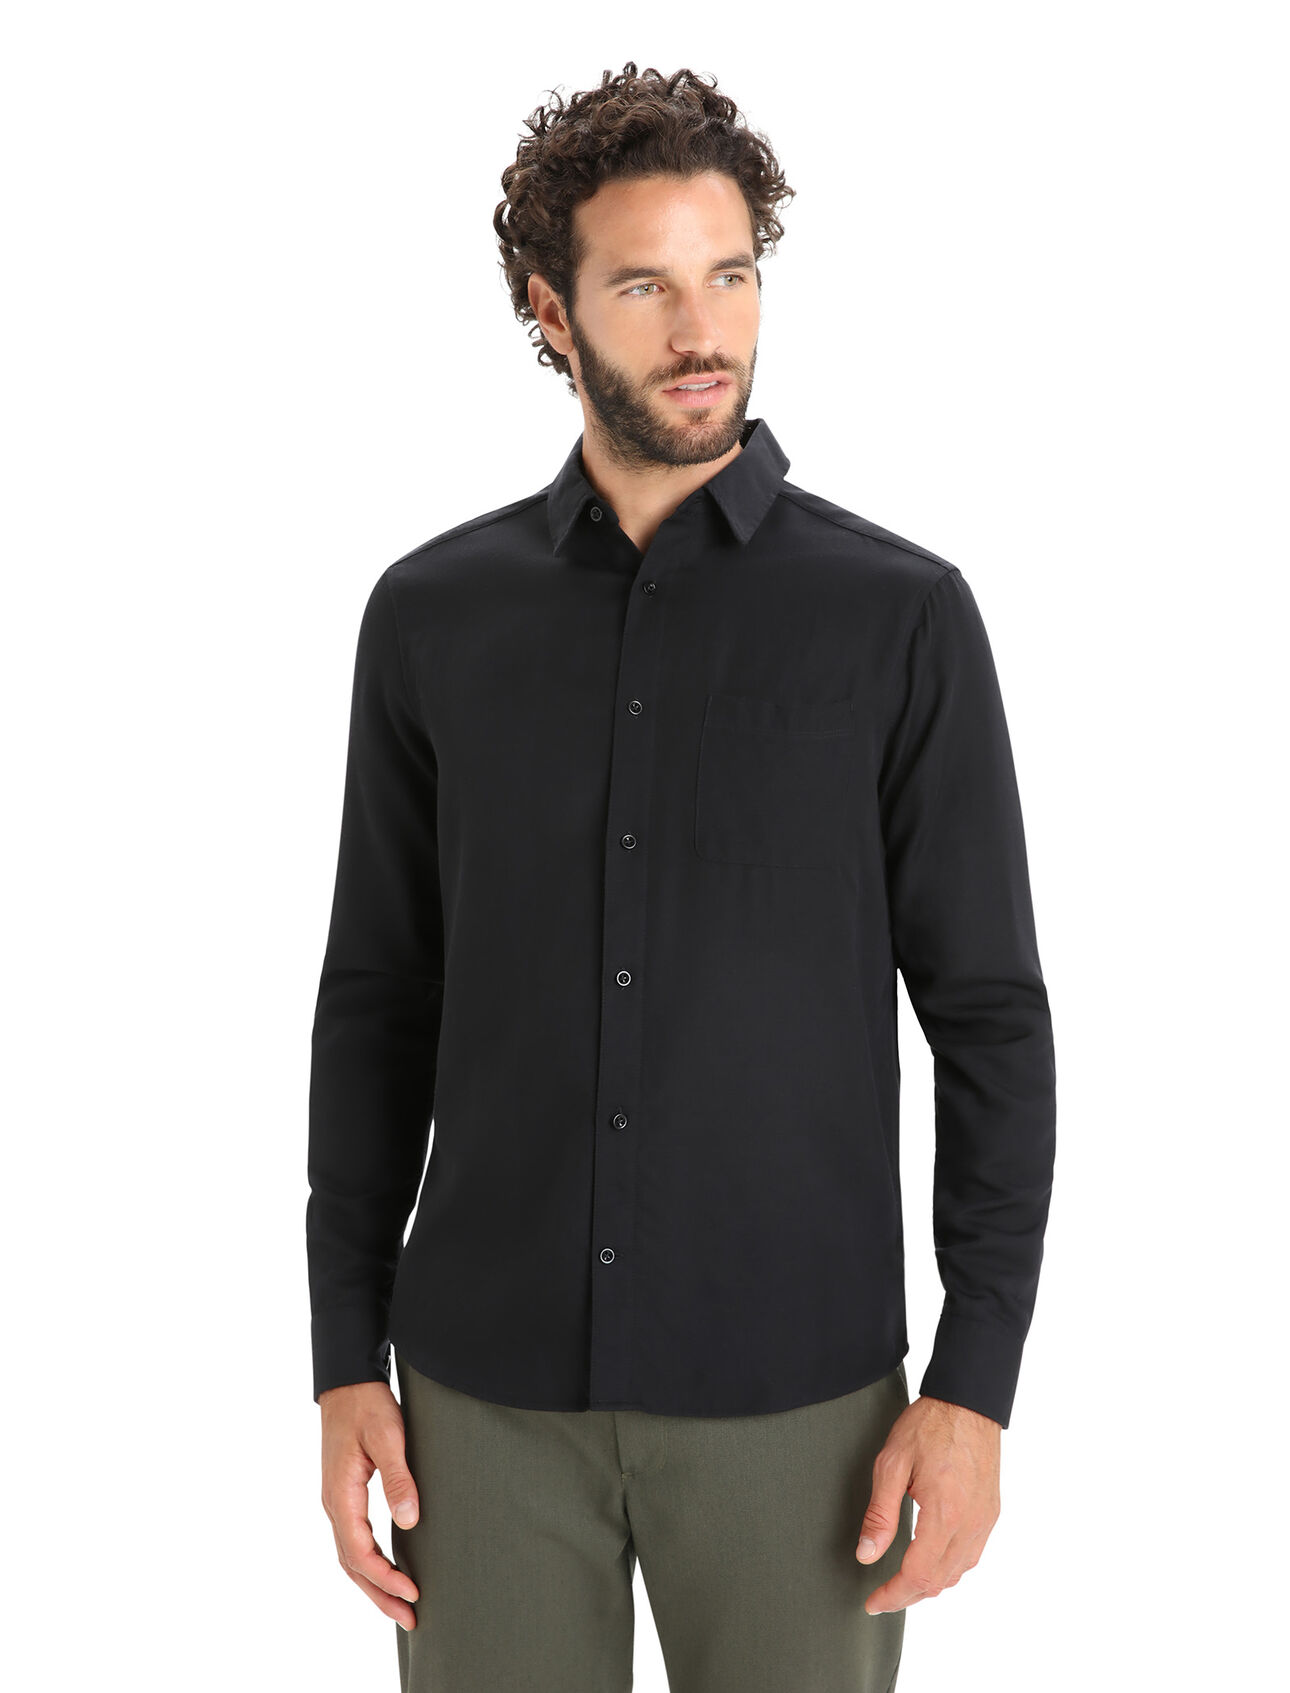 Mens Merino Steveston Long Sleeve Shirt A classic lightweight woven shirt featuring our breathable Cool-Lite™ woven merino blend, the Steveston Long Sleeve Shirt combines versatile style with natural comfort.